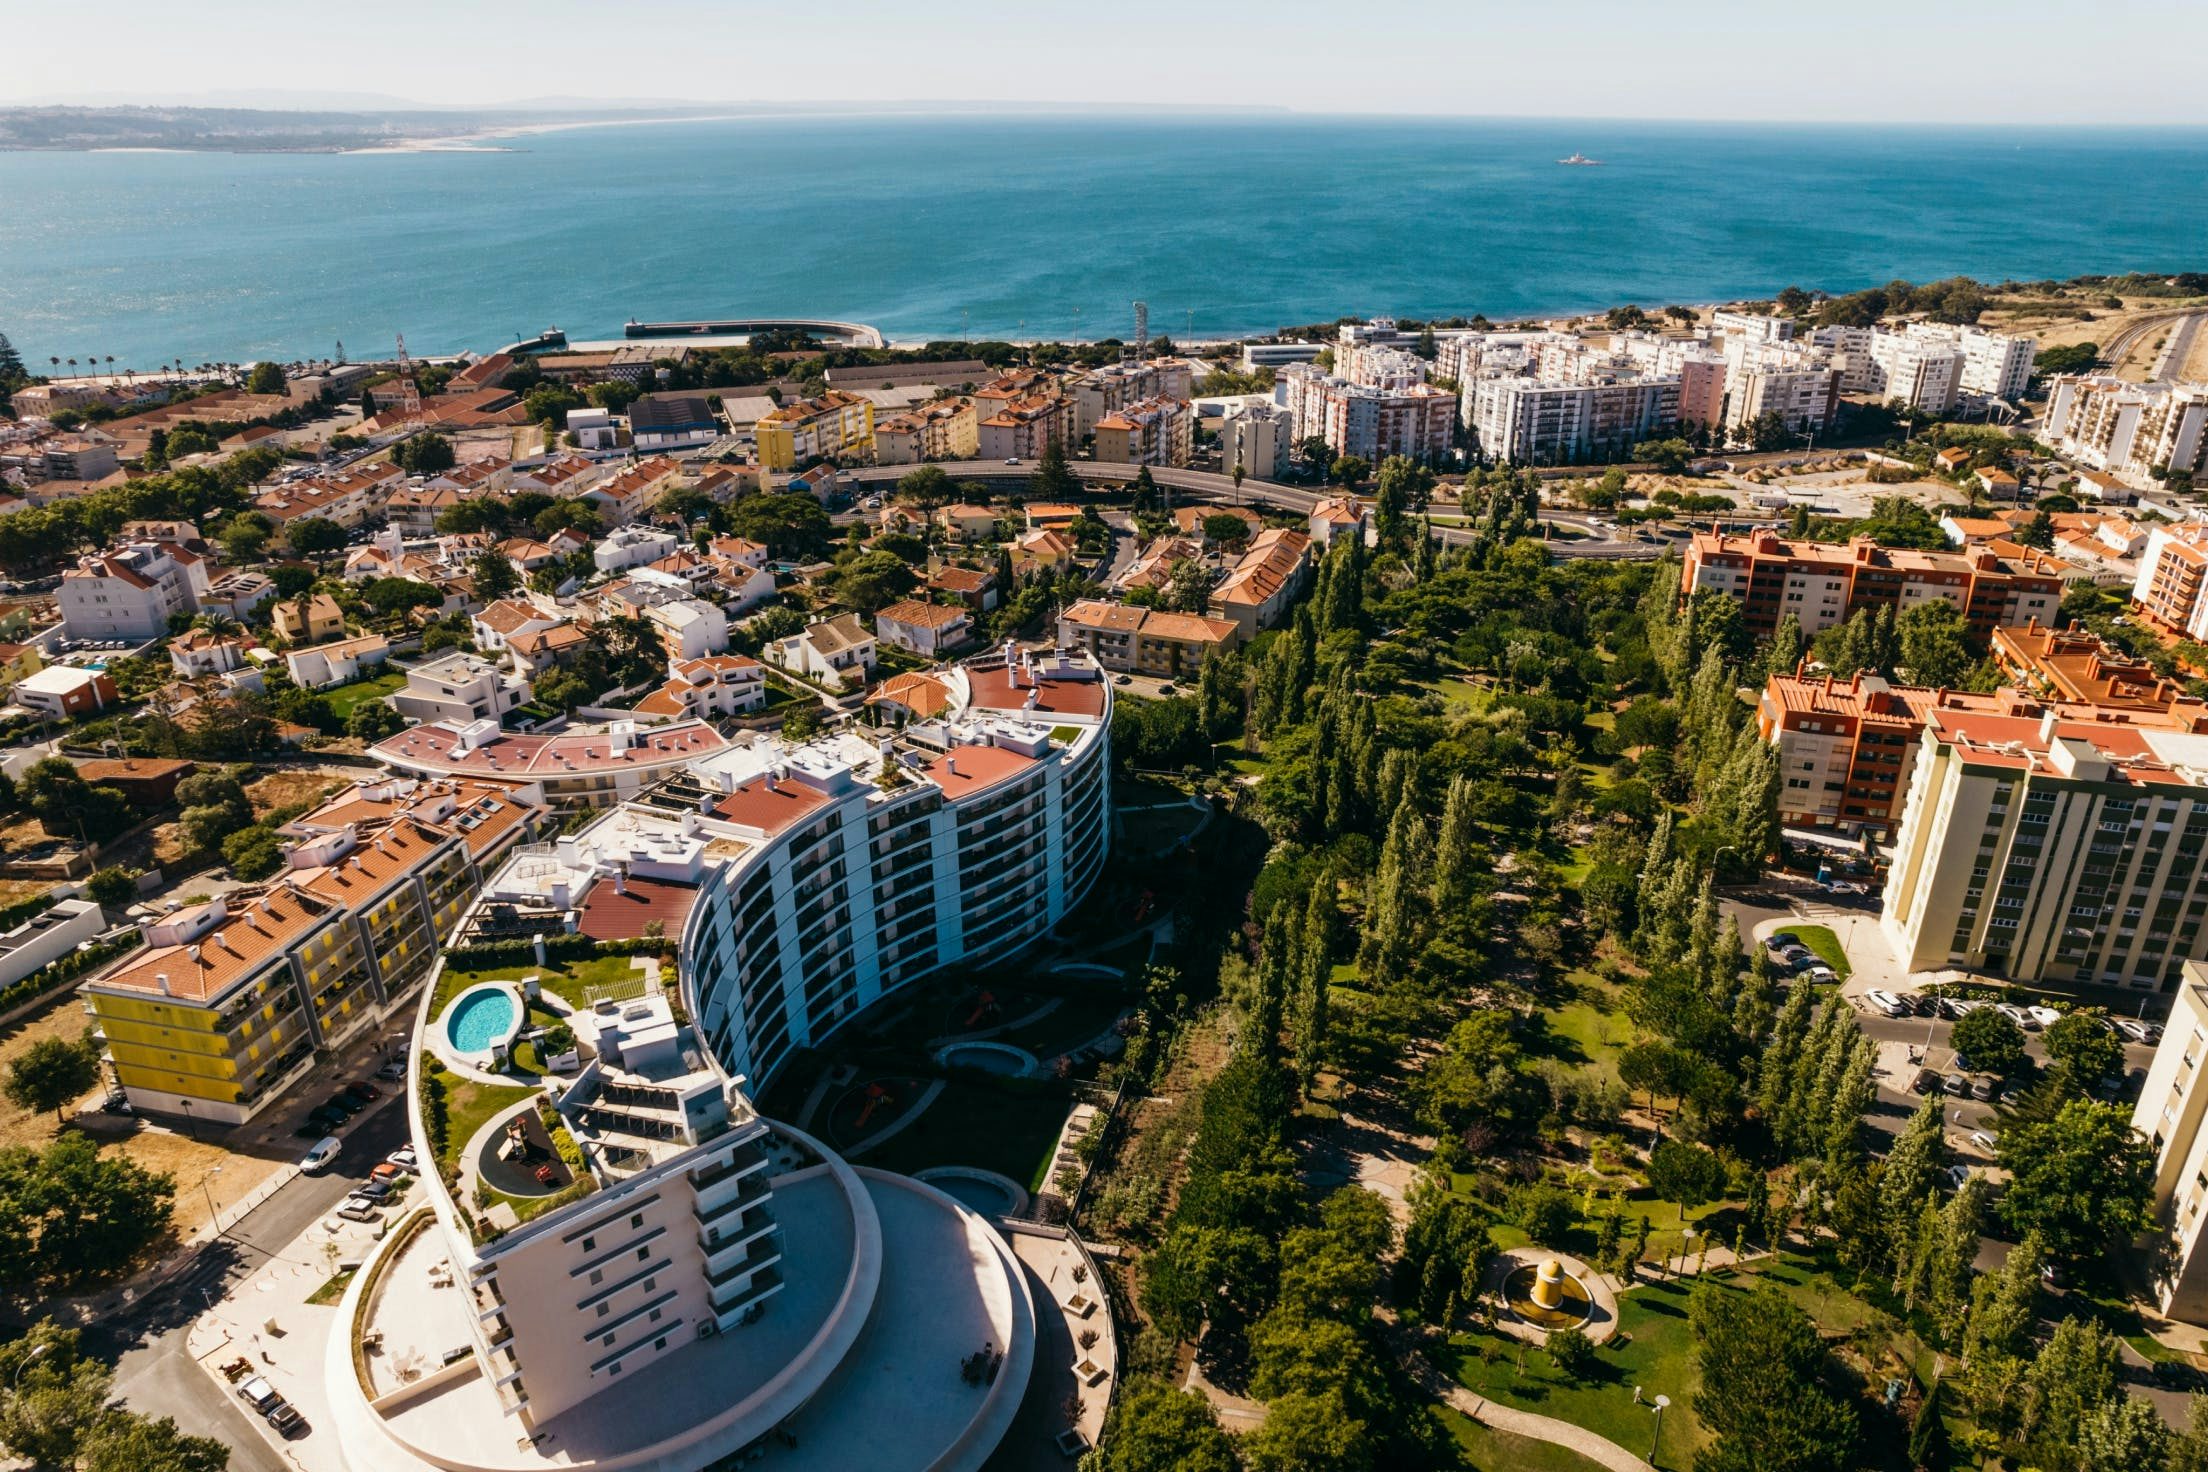 A photo of a birds-eye view of a city in Portugal